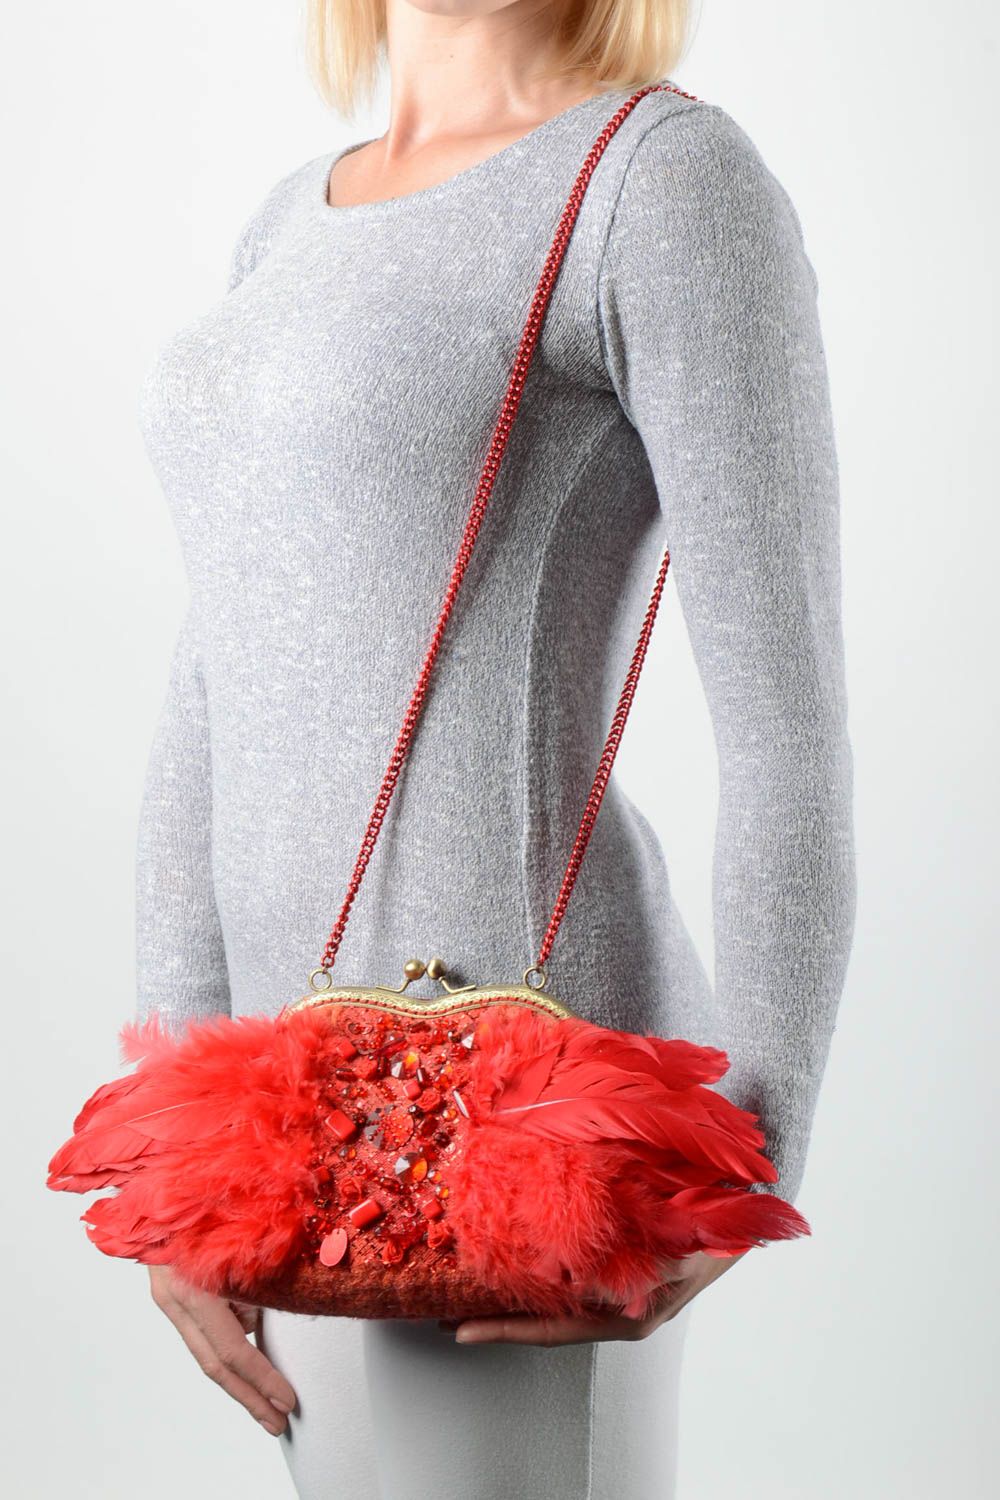 Handmade unique wool felted bag designer luxury accessory present for woman photo 1